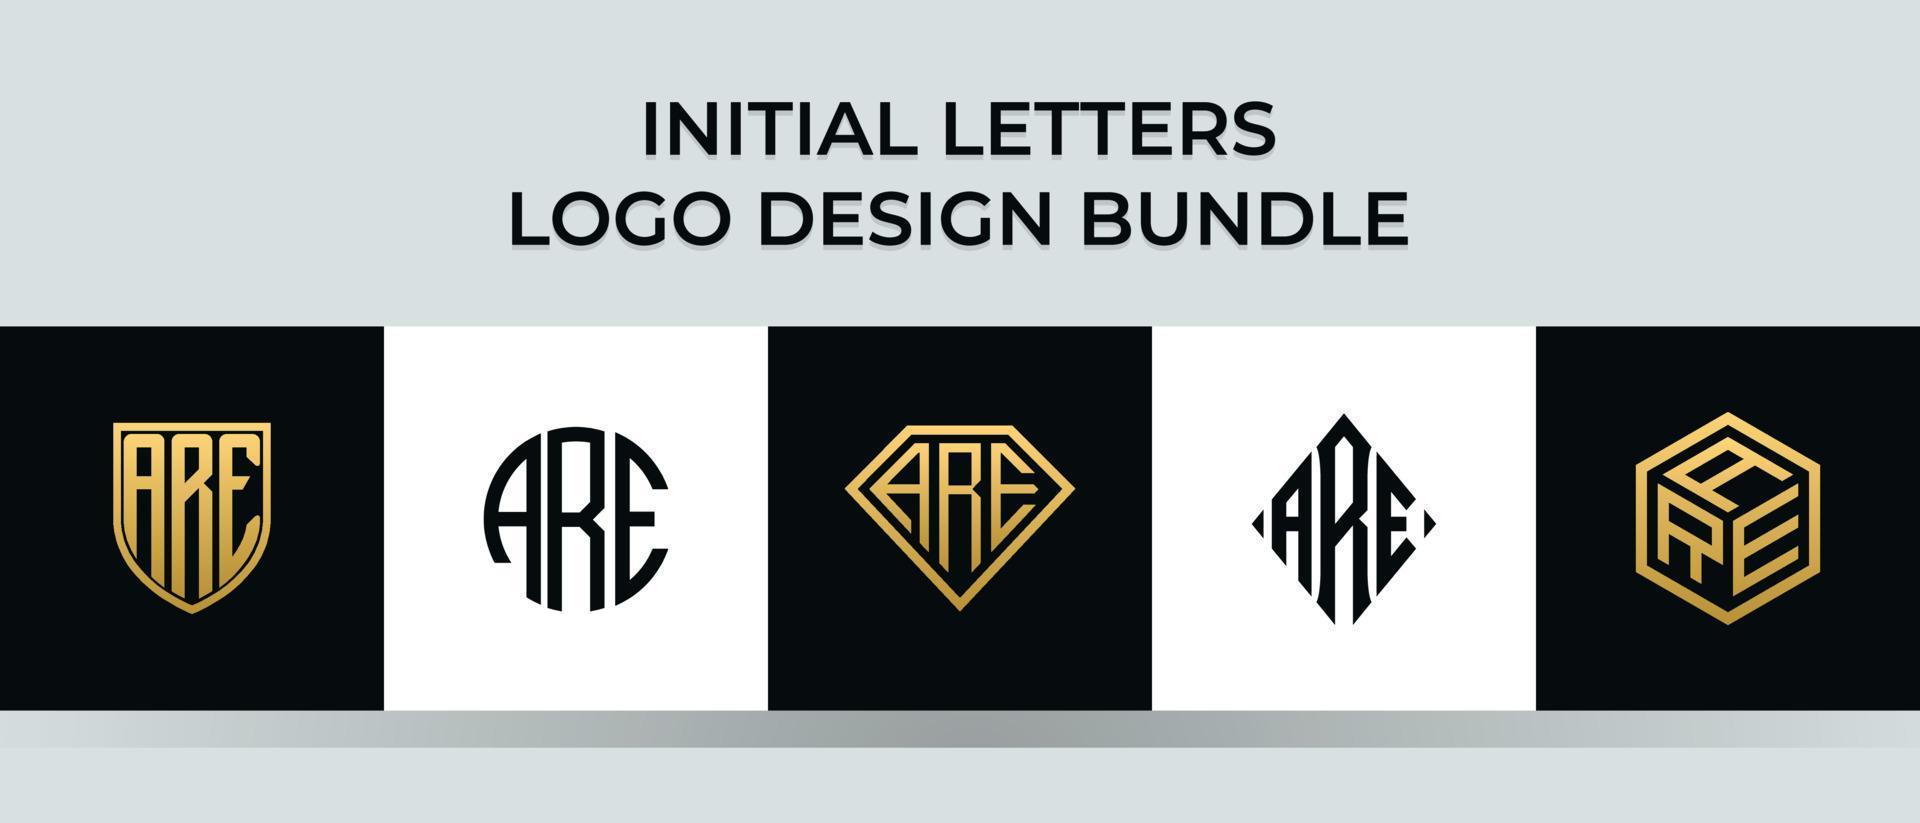 Initial letters ARE logo designs Bundle vector